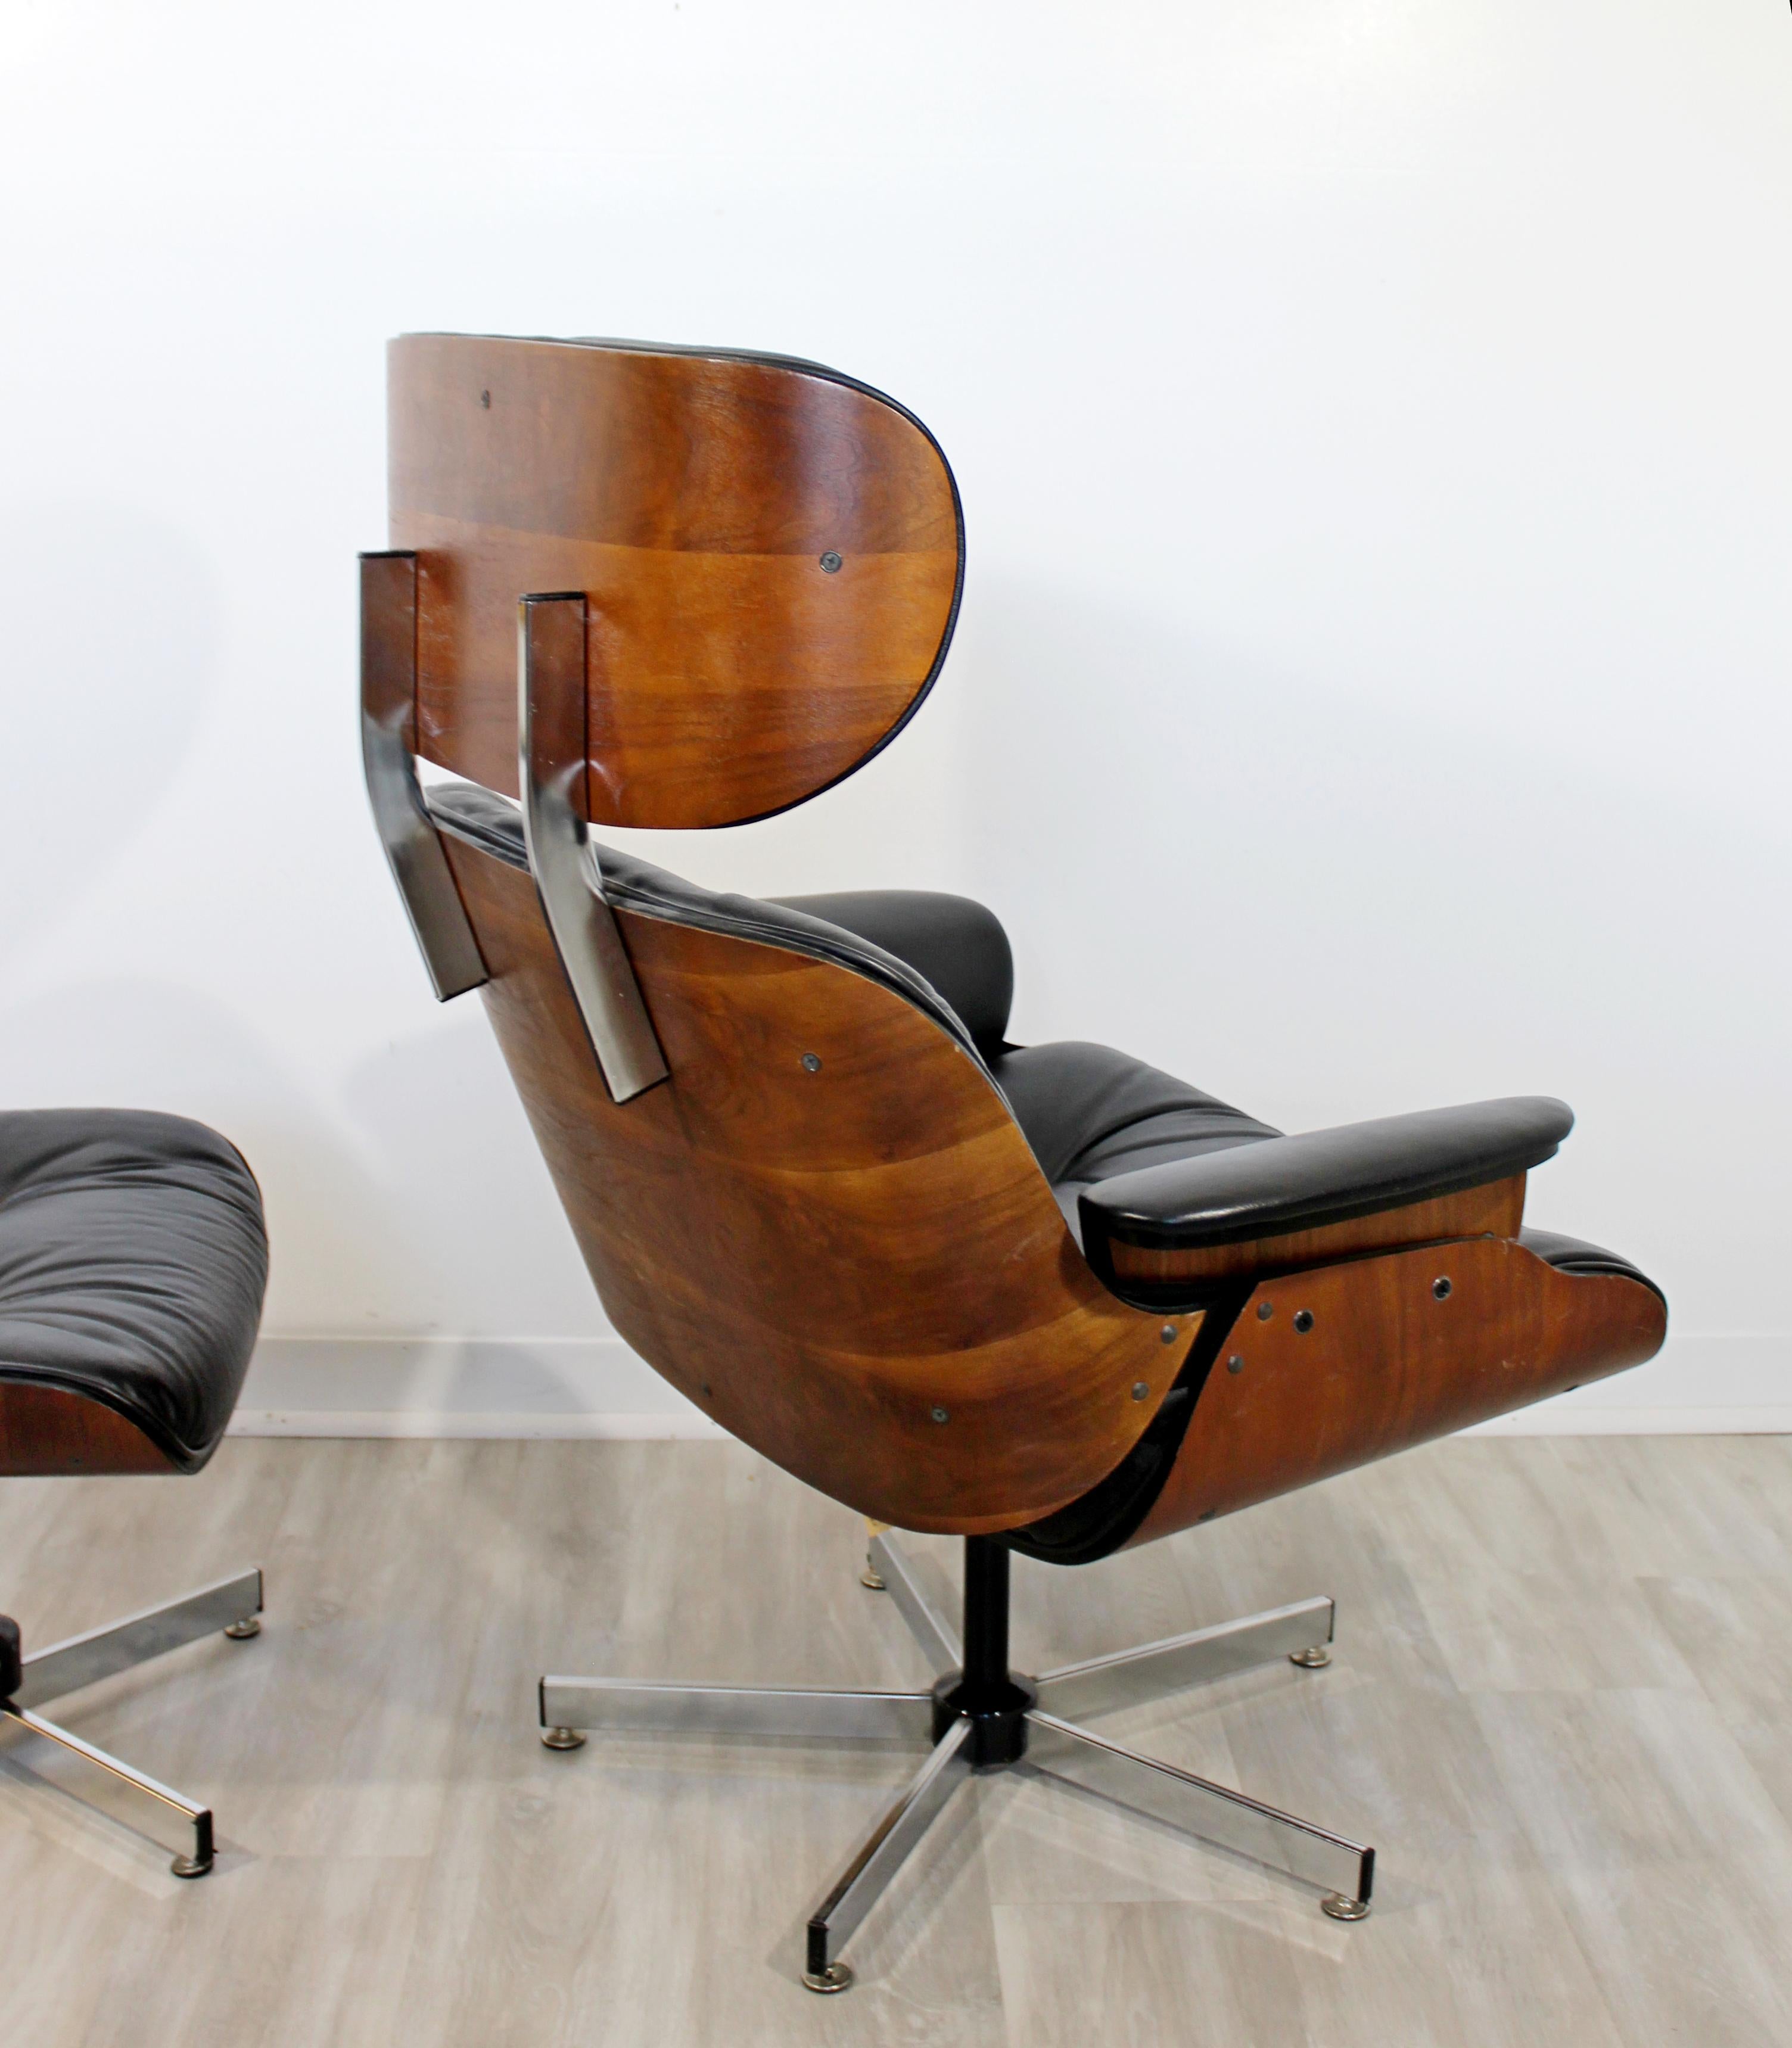 American Mid-Century Modern Plycraft Lounge Chair and Ottoman Eames Herman Miller Style